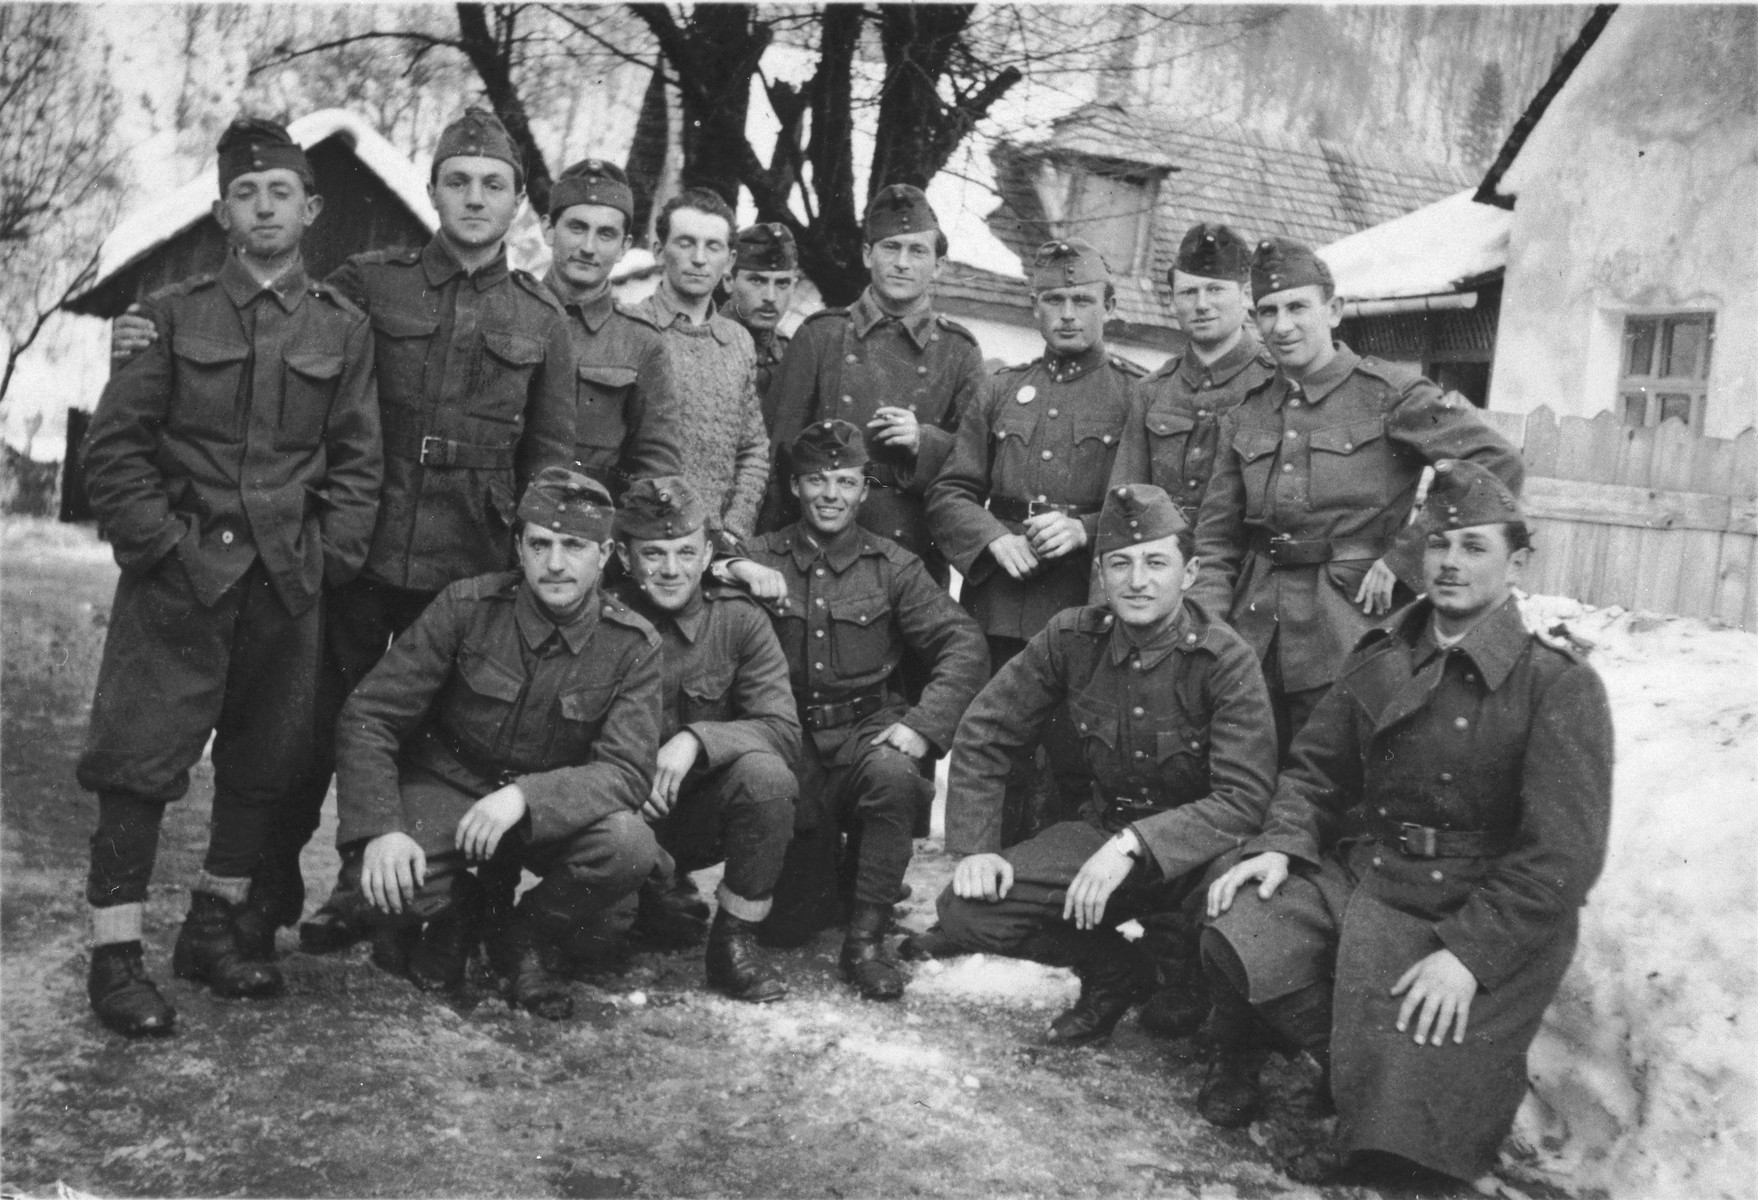 Group portrait of Jewish soldiers in the Hungarian army.

Jeno Lebowiz is pictured kneeling second from the right.  Also pictured are Klein (front row, center) and Greenstein (standing, second from the right).